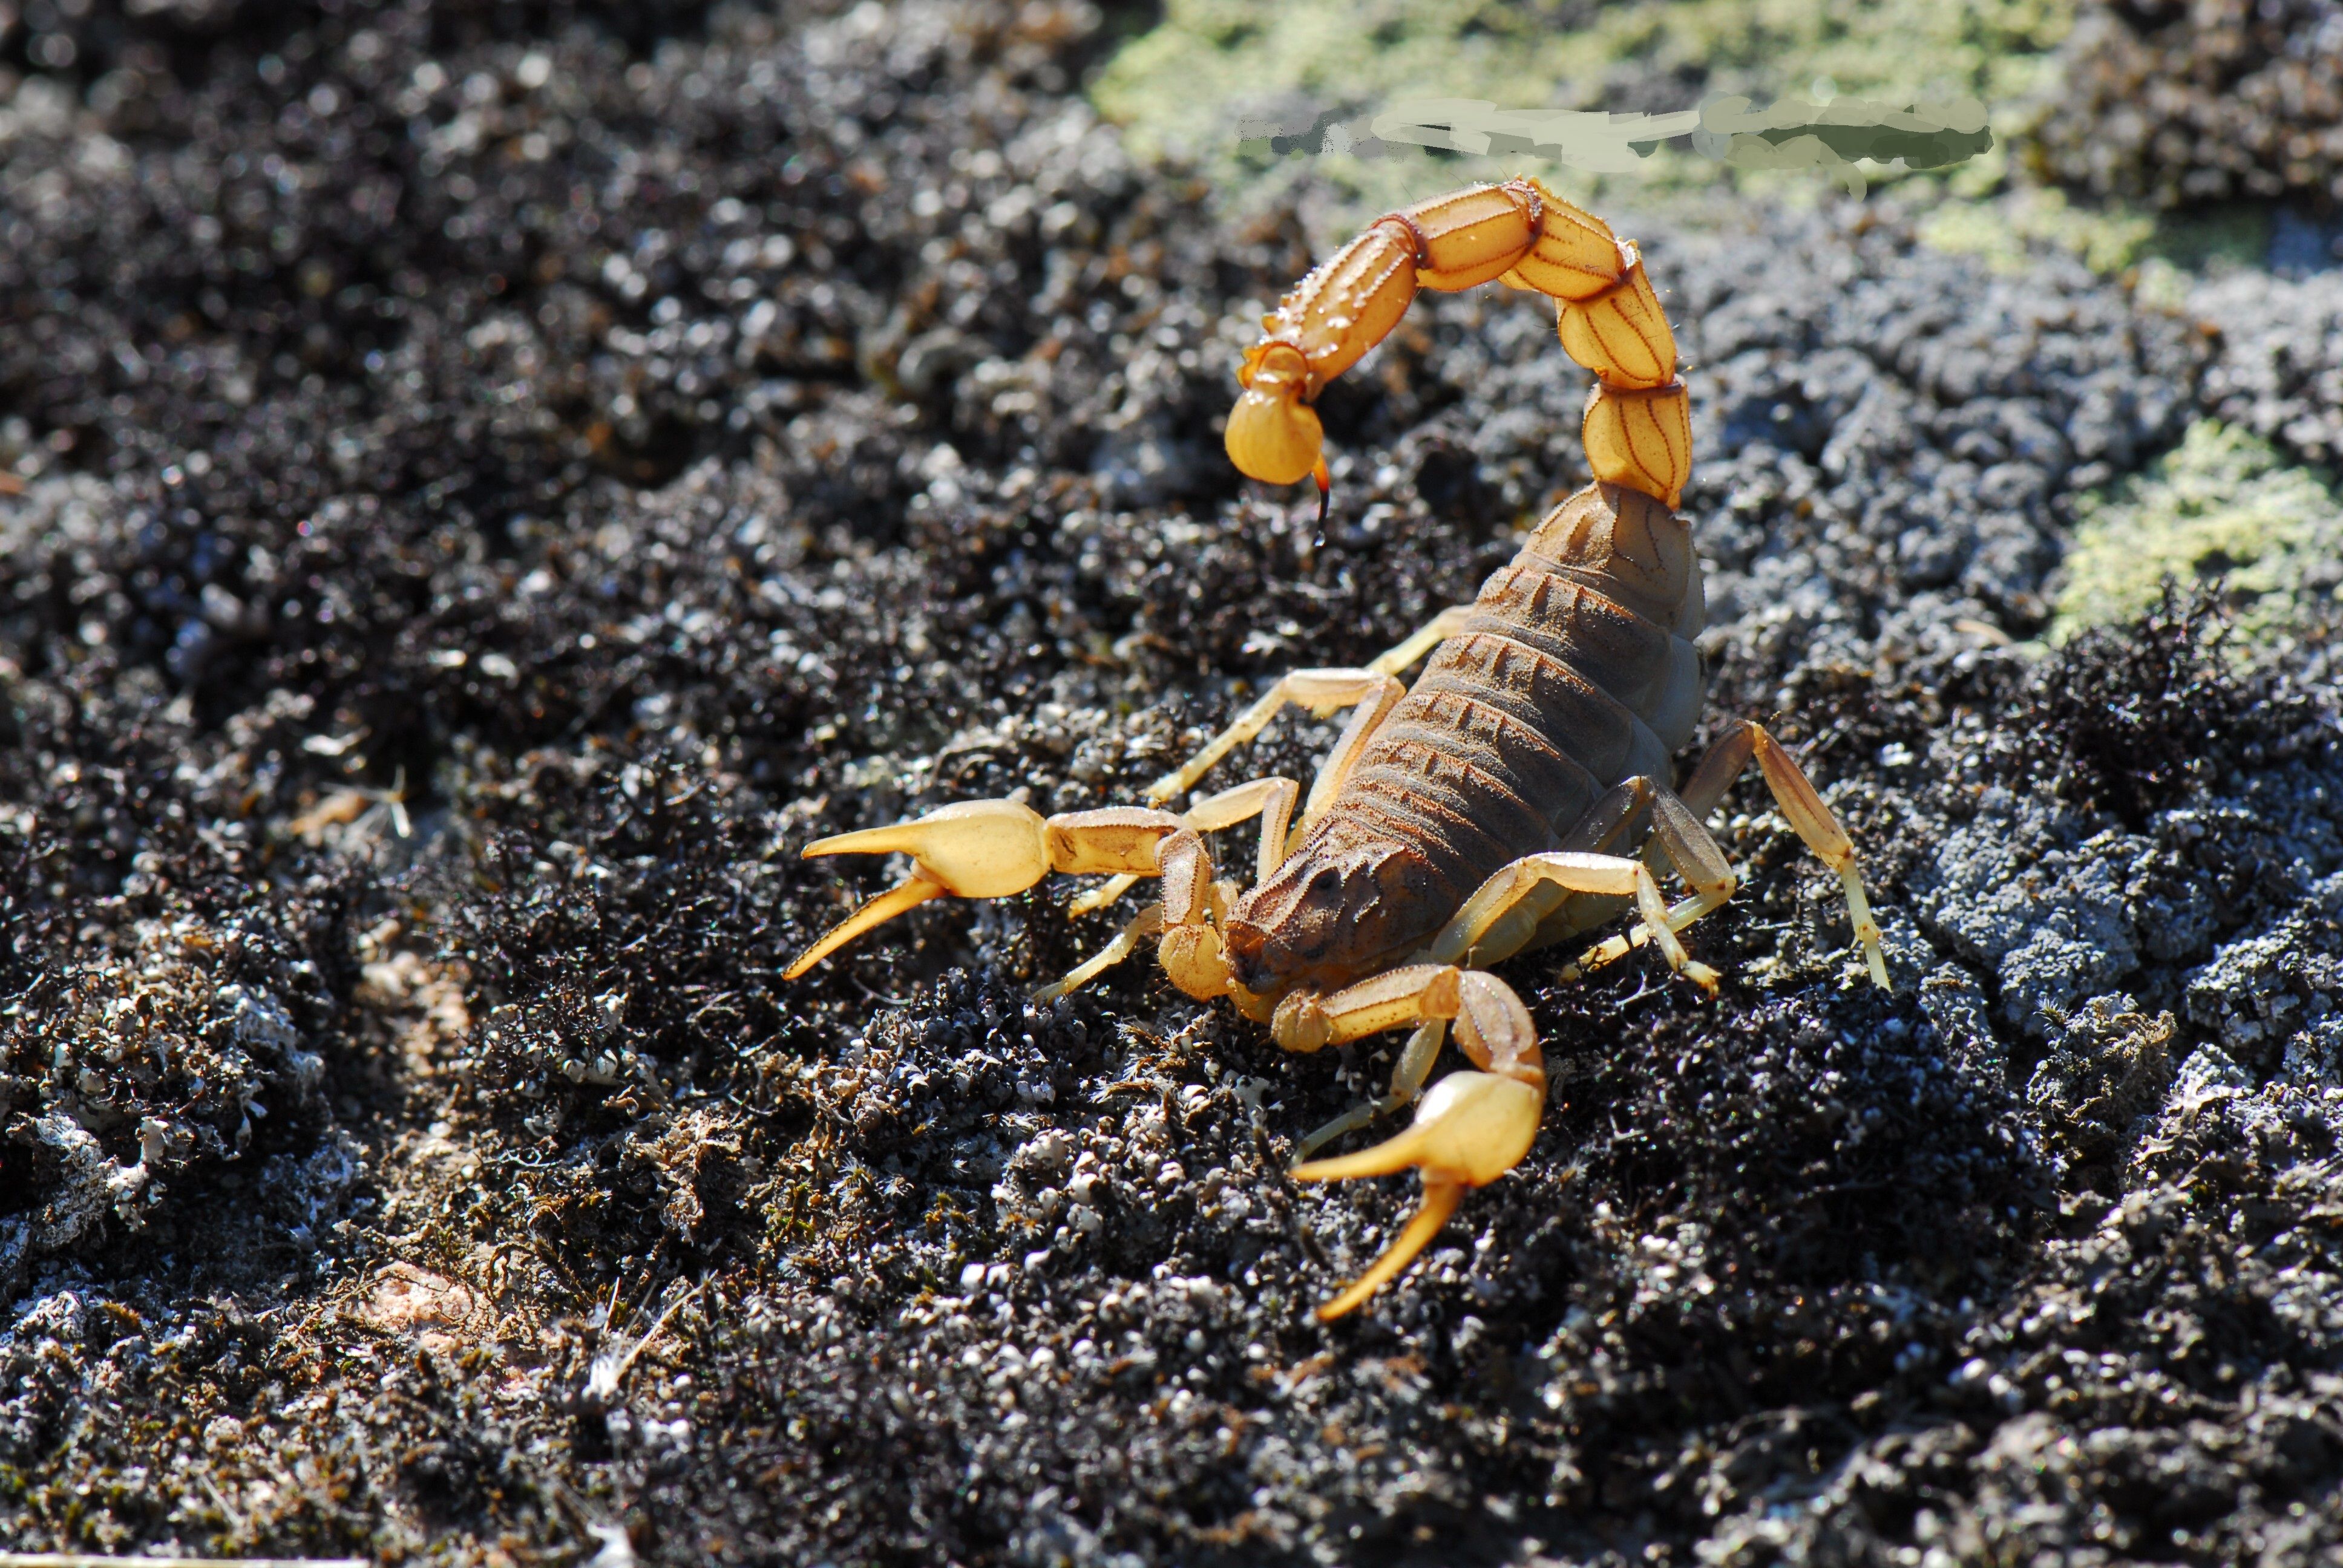 Scorpion HD Wallpaper and Background Image